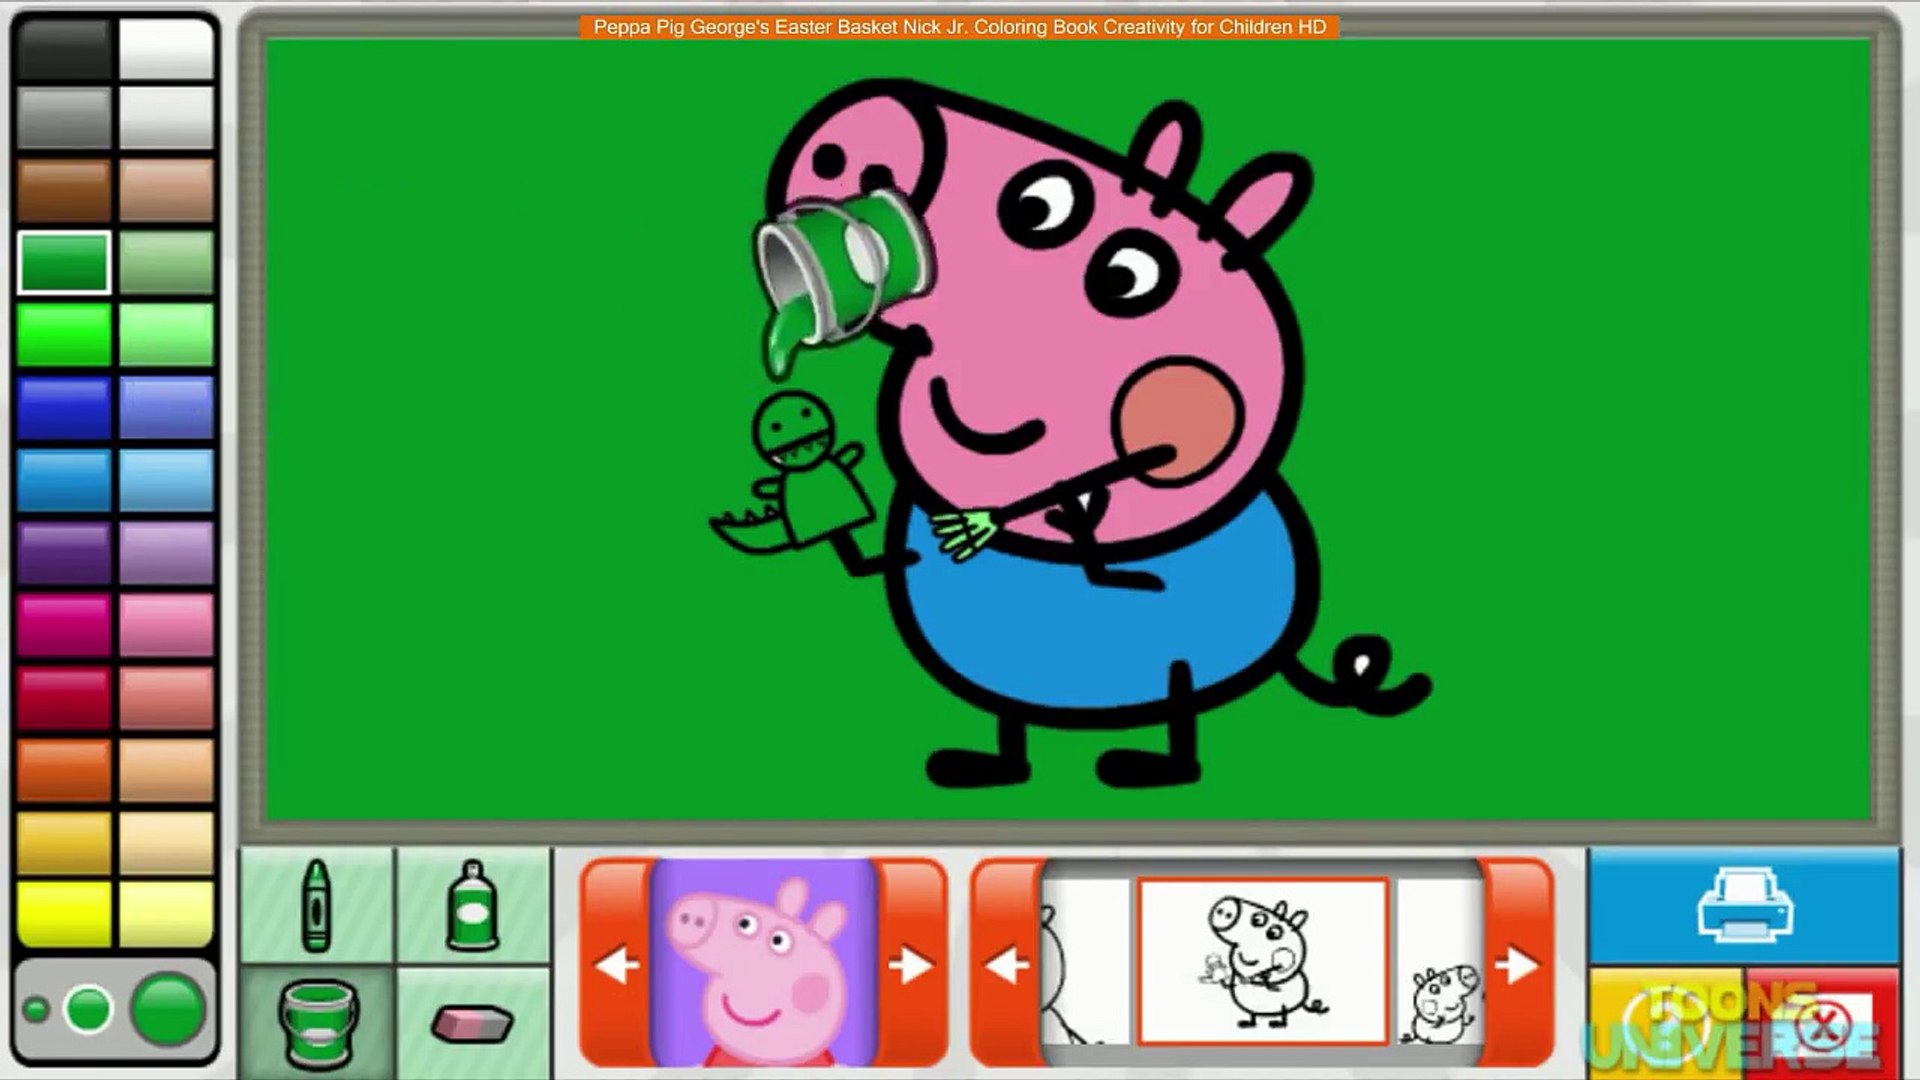 Download Peppa Pig George S Easter Basket Nick Jr Coloring Book Creativity For Children Hd Video Dailymotion SVG Cut Files